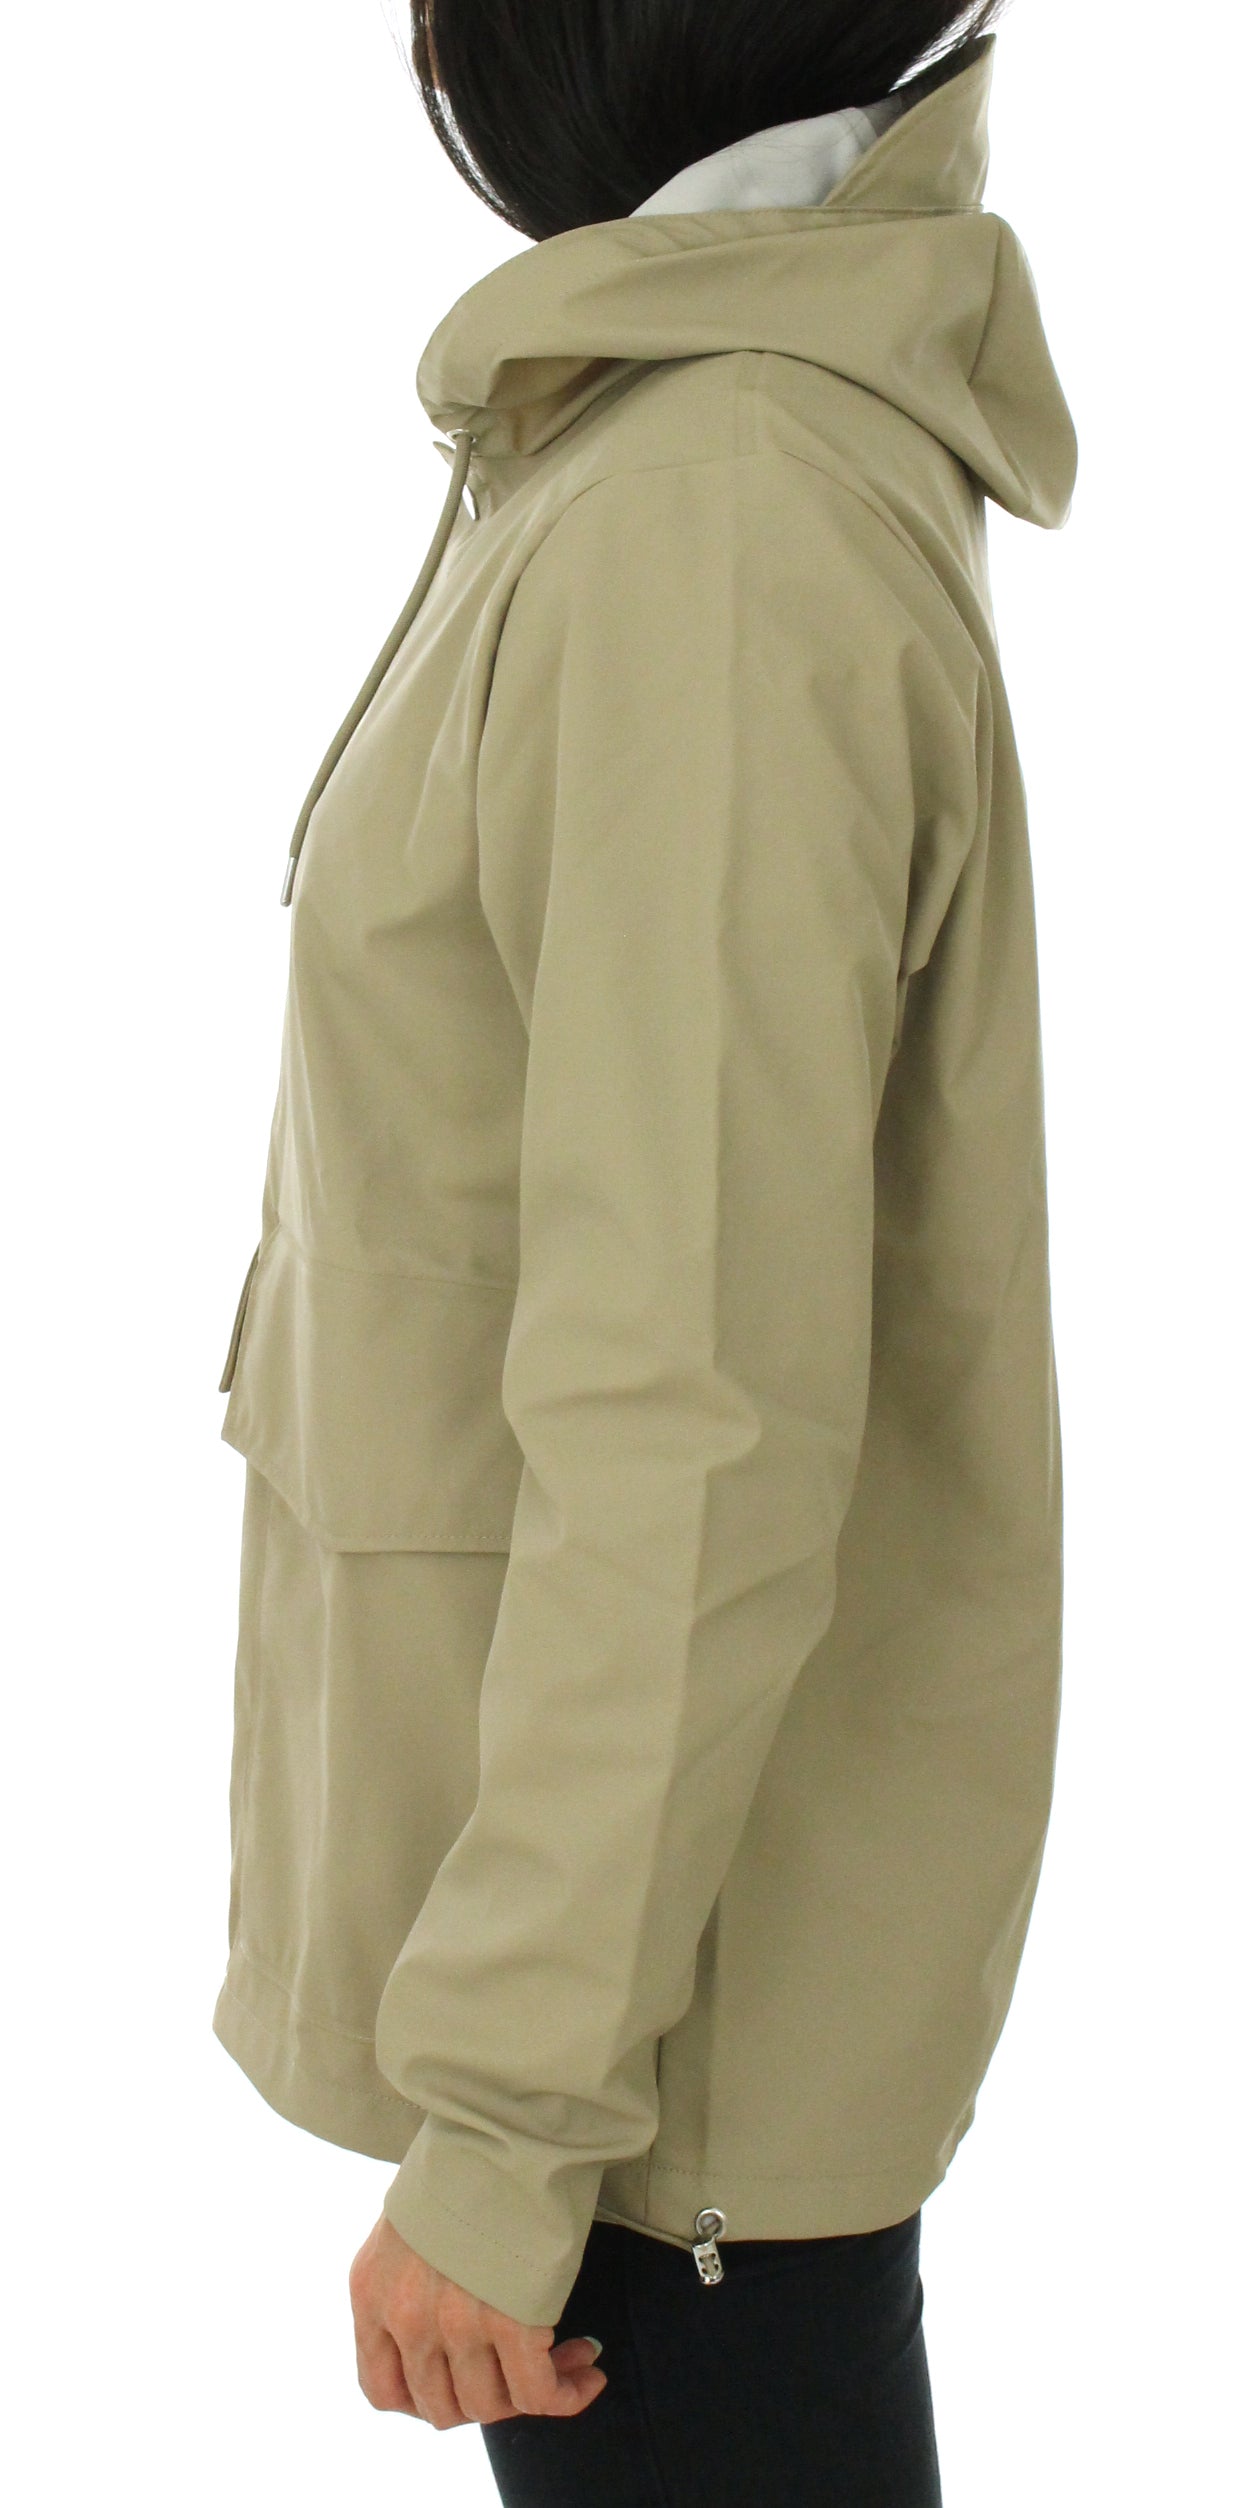 Unisex Impermeable jacket 1826 colonial